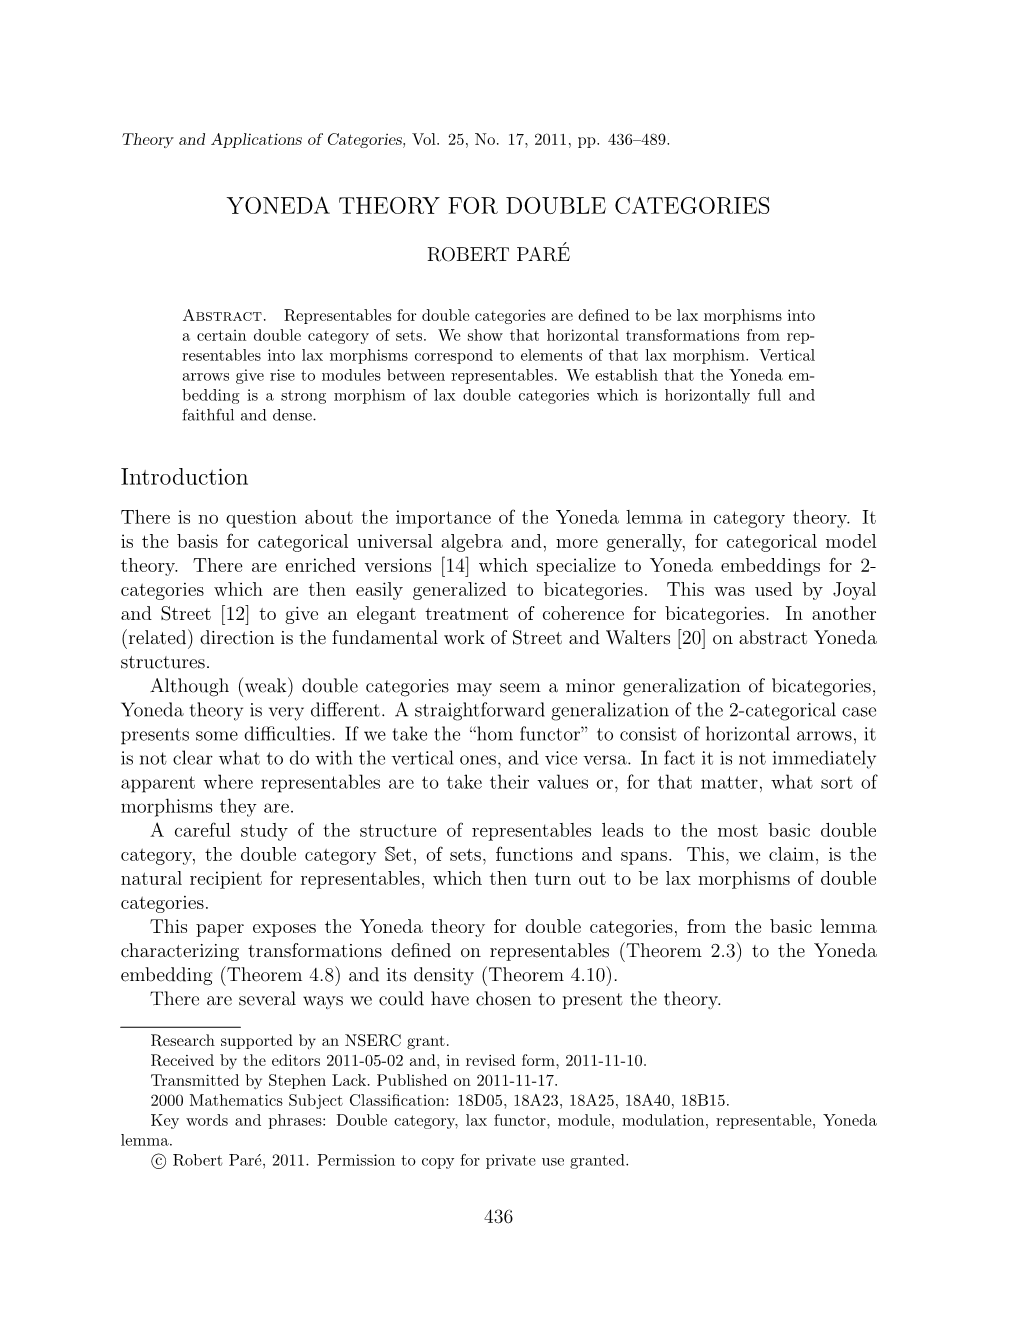 Yoneda Theory for Double Categories